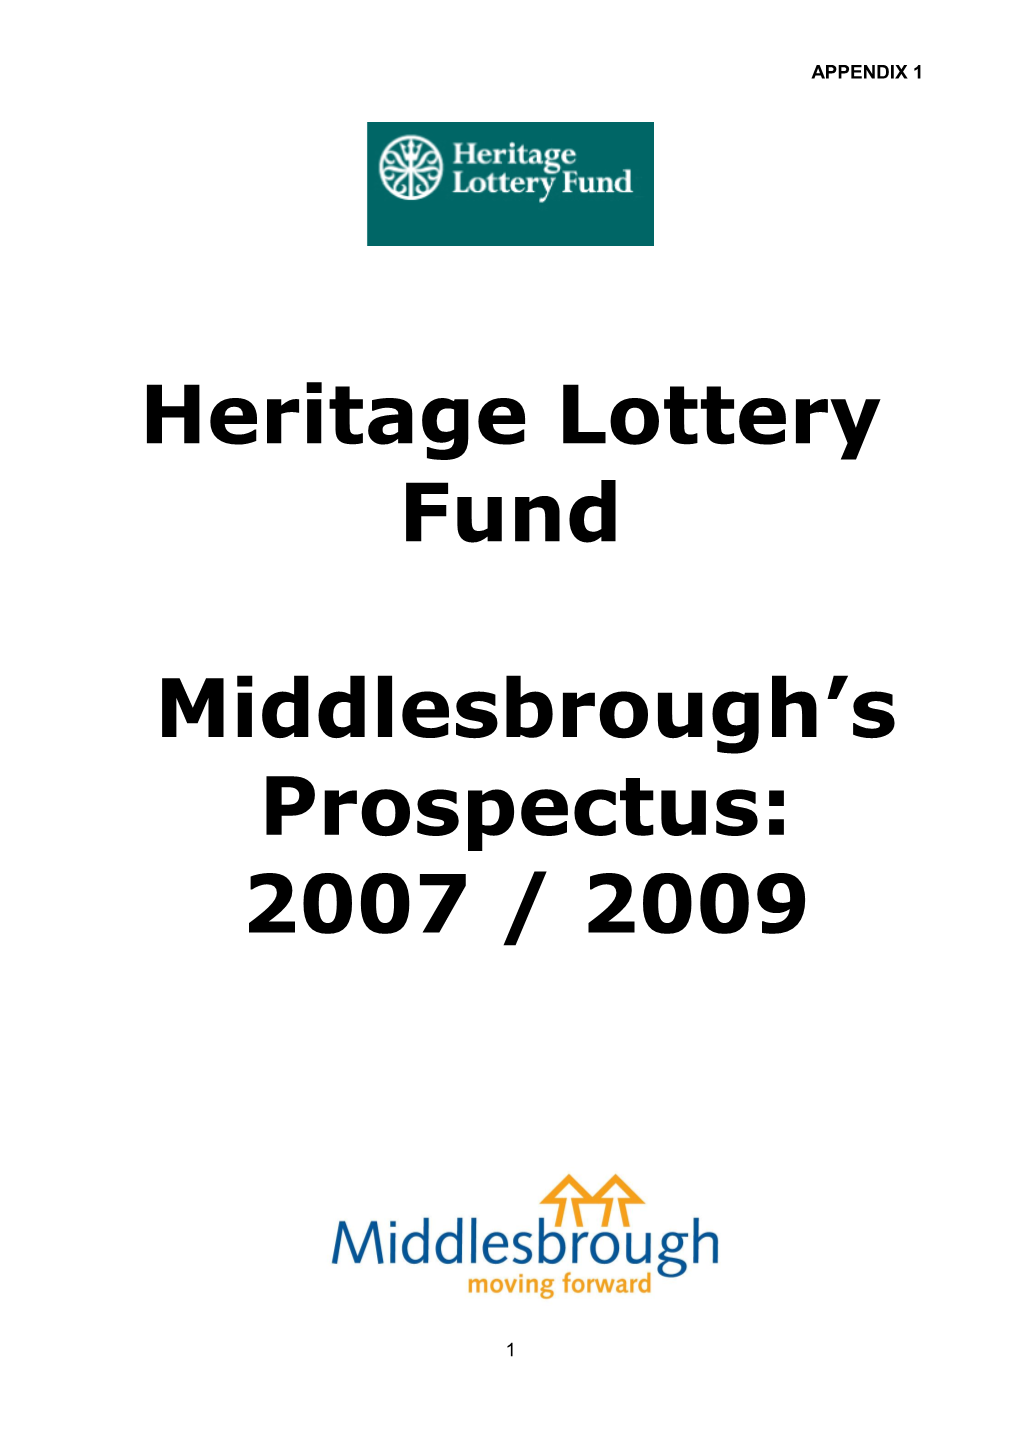 The Heritage Lottery Fund and Middlesbrough 2007 / 2009